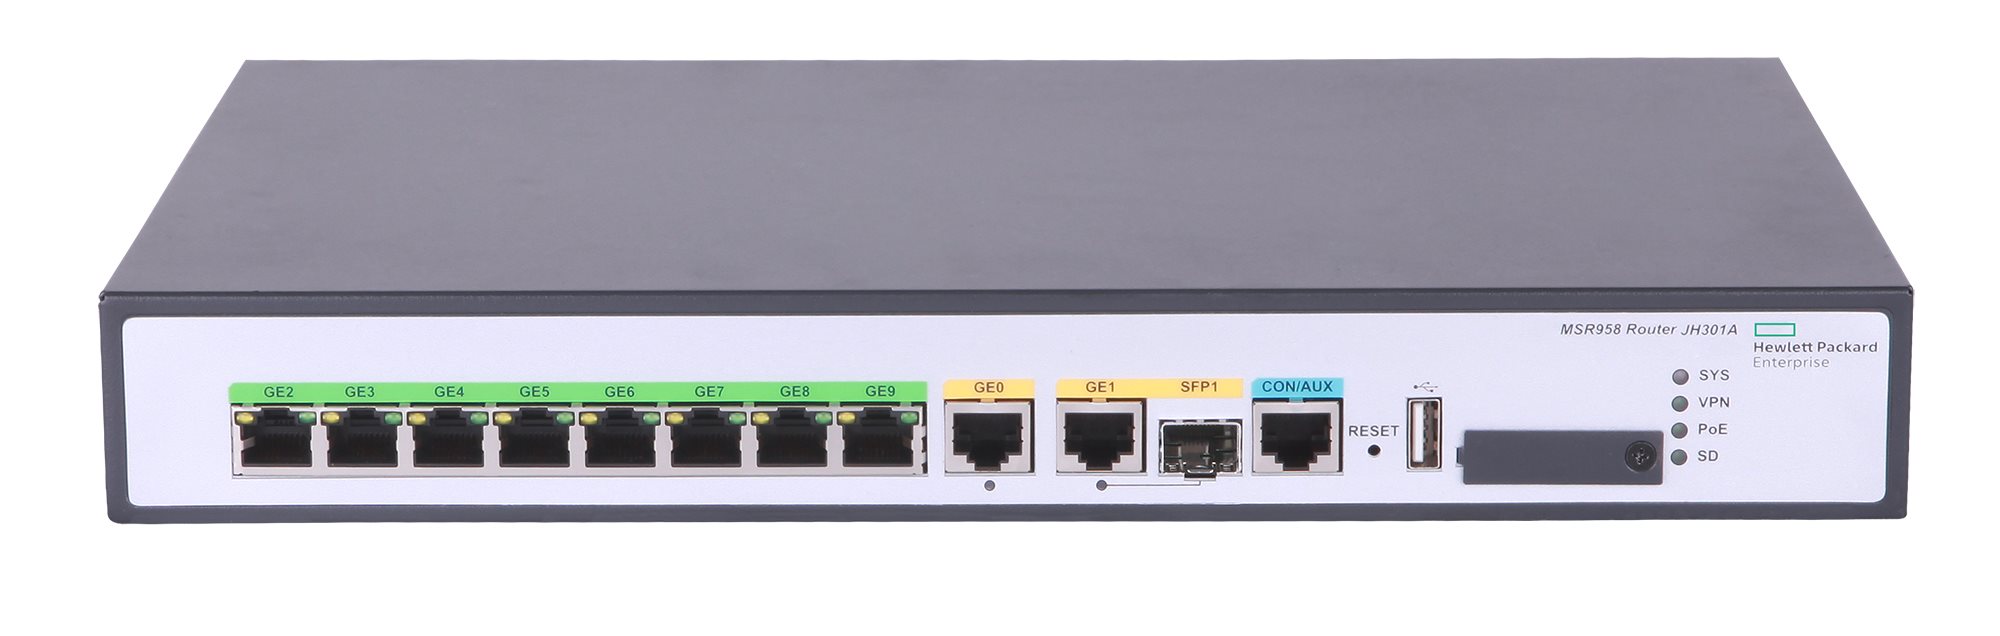 HPE FlexNetwork MSR958 1GbE and Combo 2GbE WAN 8GbE LAN PoE Router0 